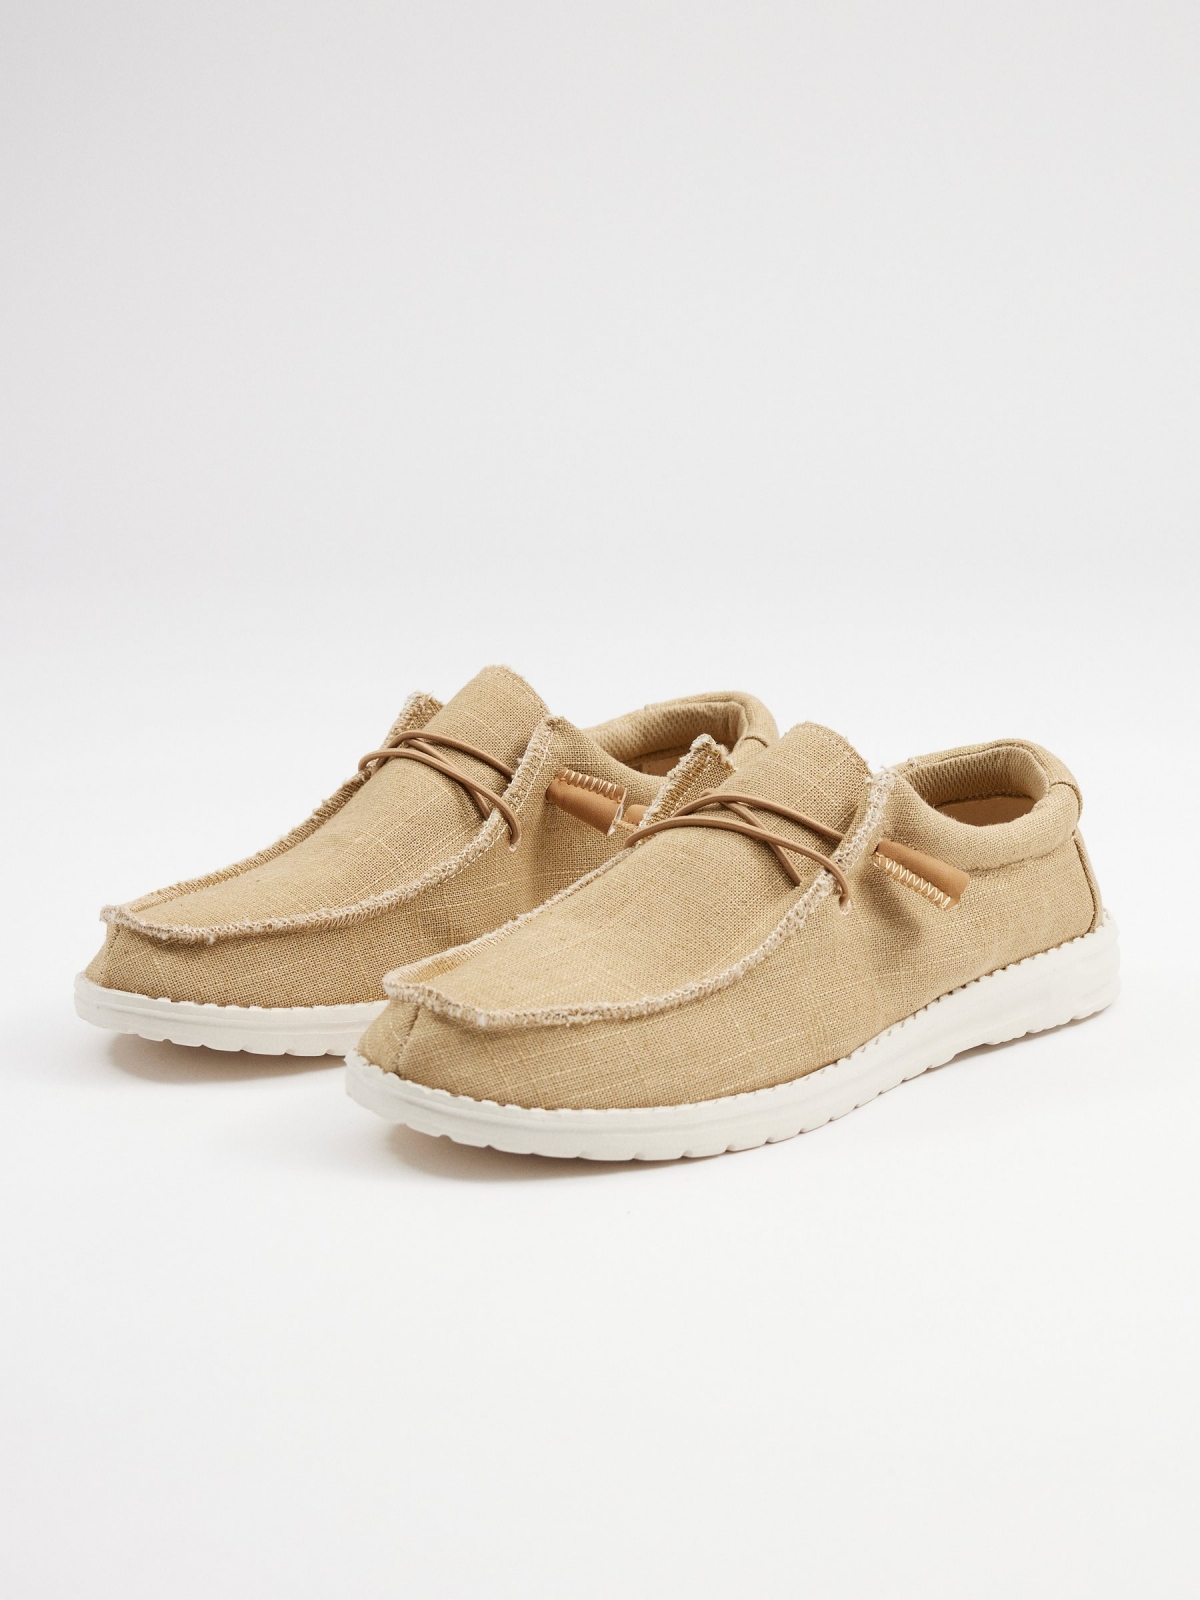 Nylon elastic sneakers sand 45º front view